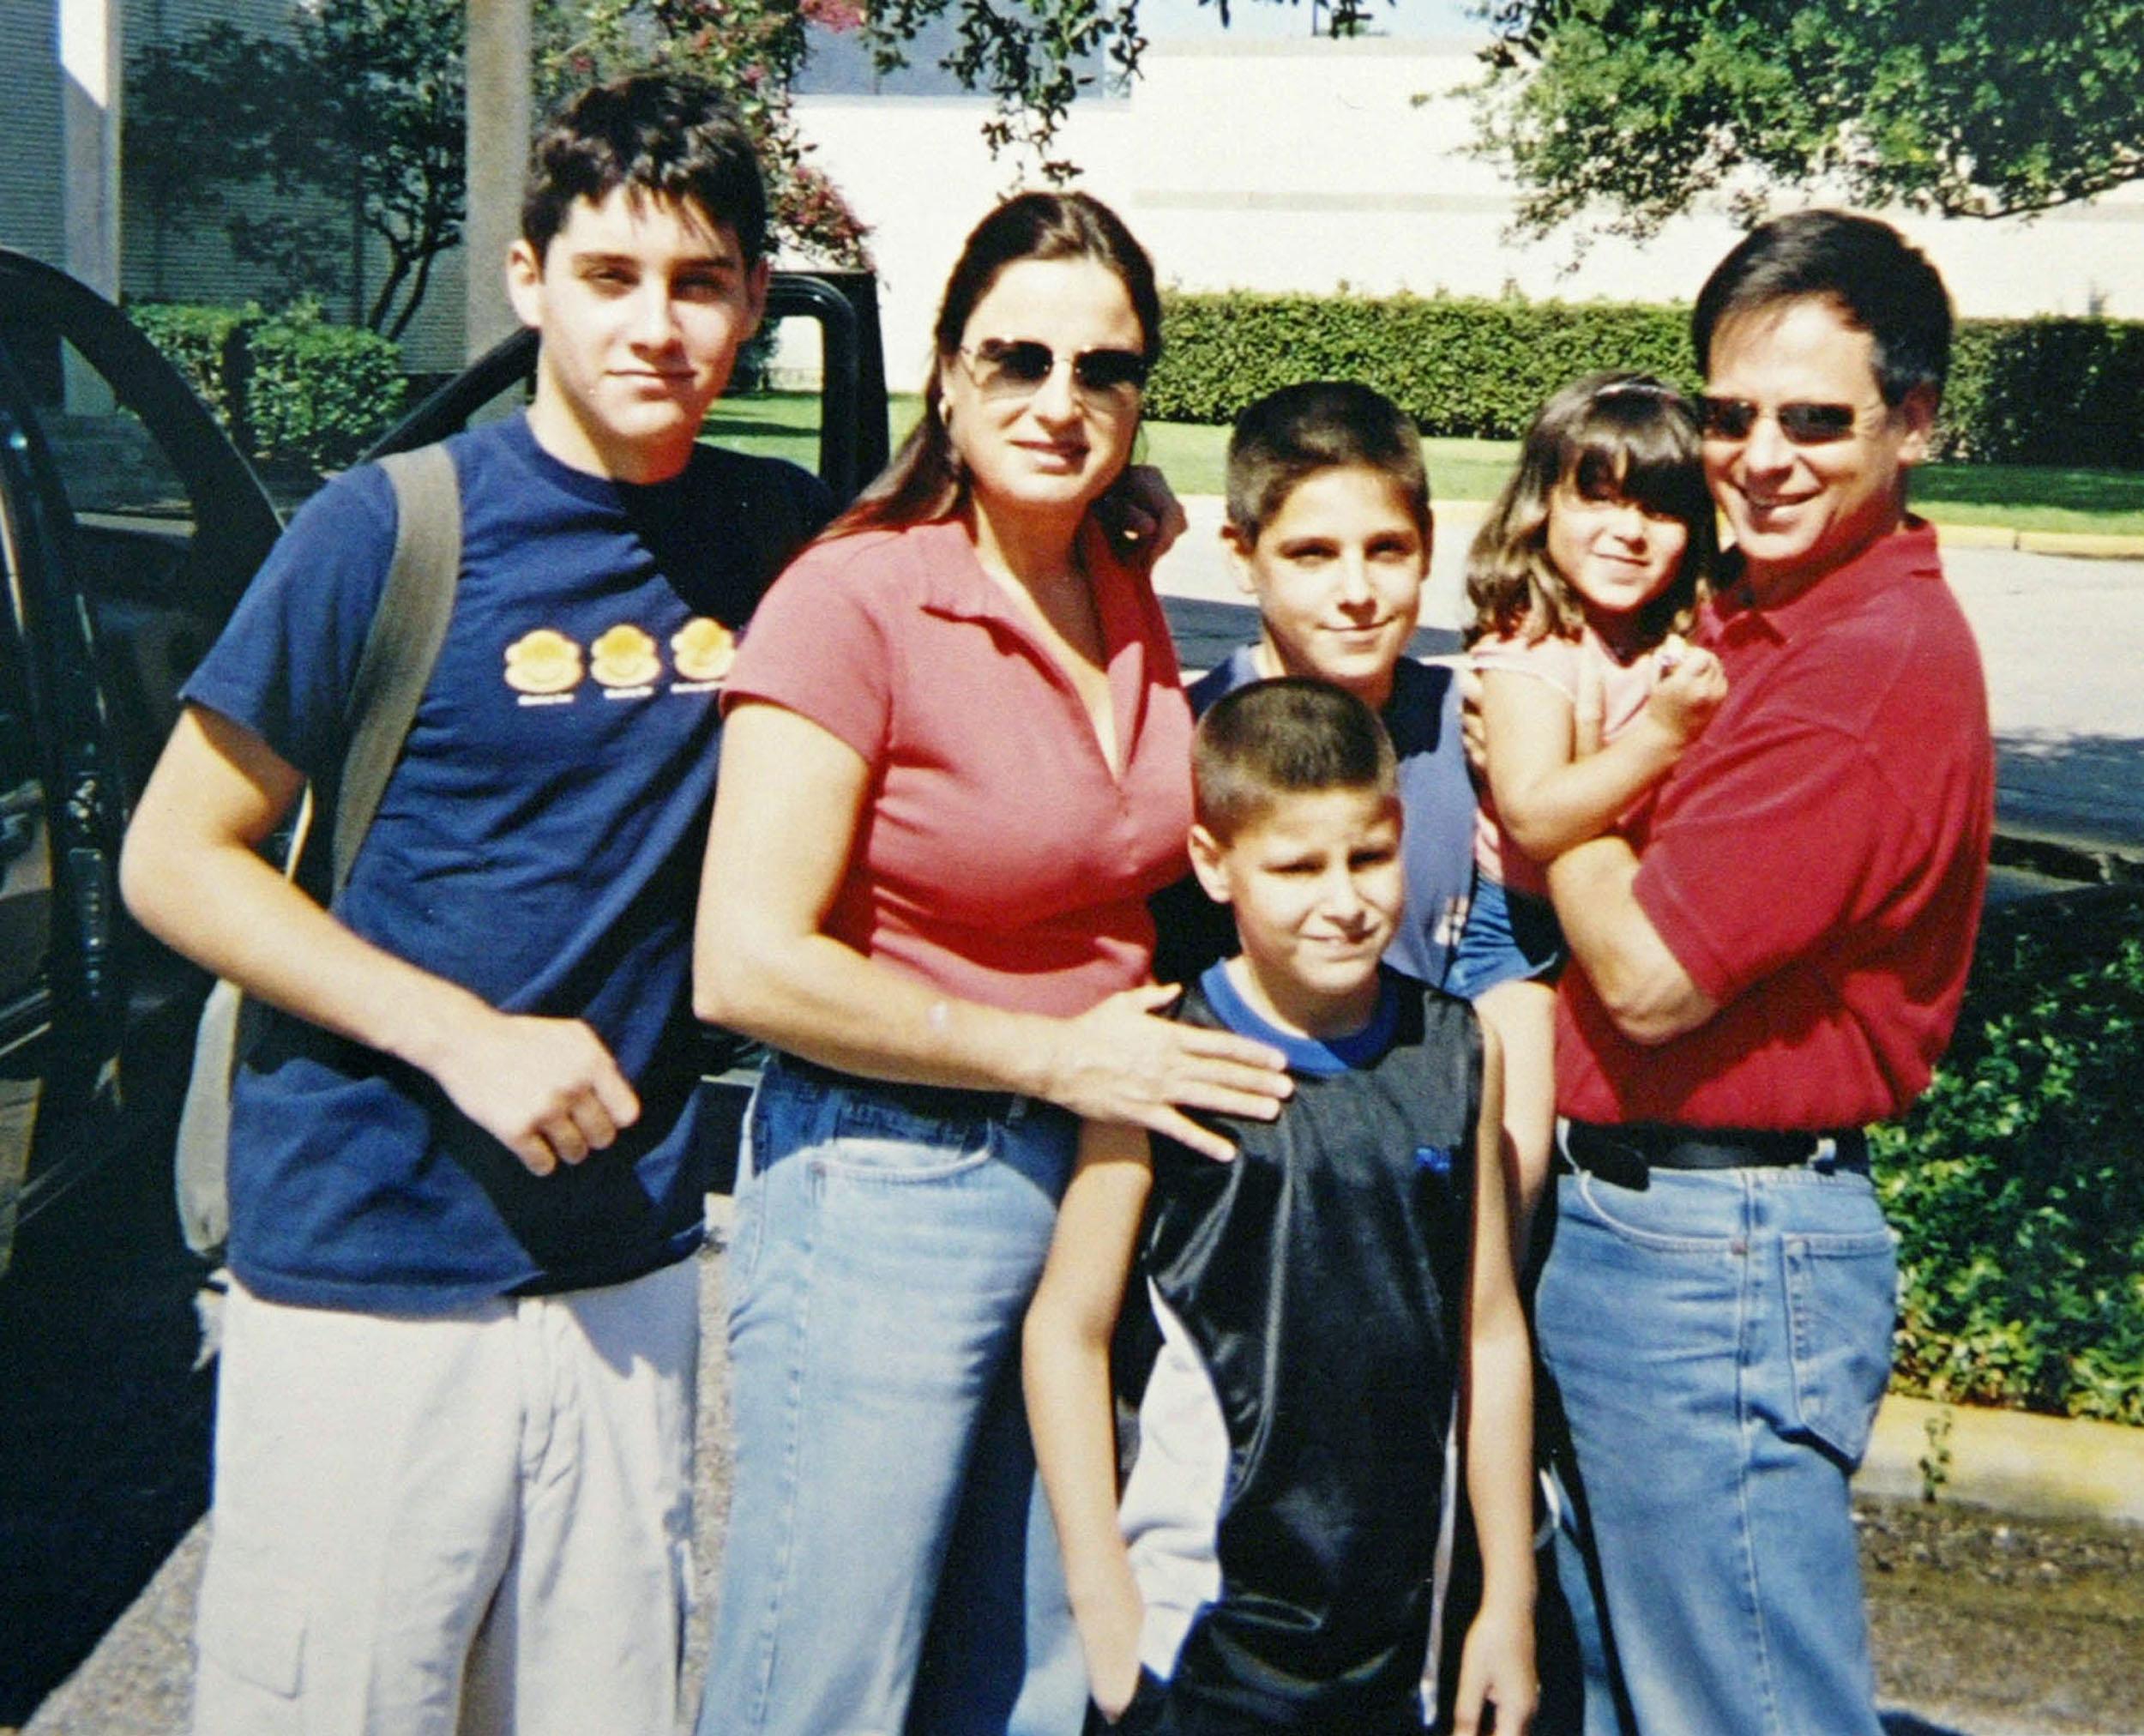 Rona and Ilan with their son Asaf (left) and three younger children in 2002